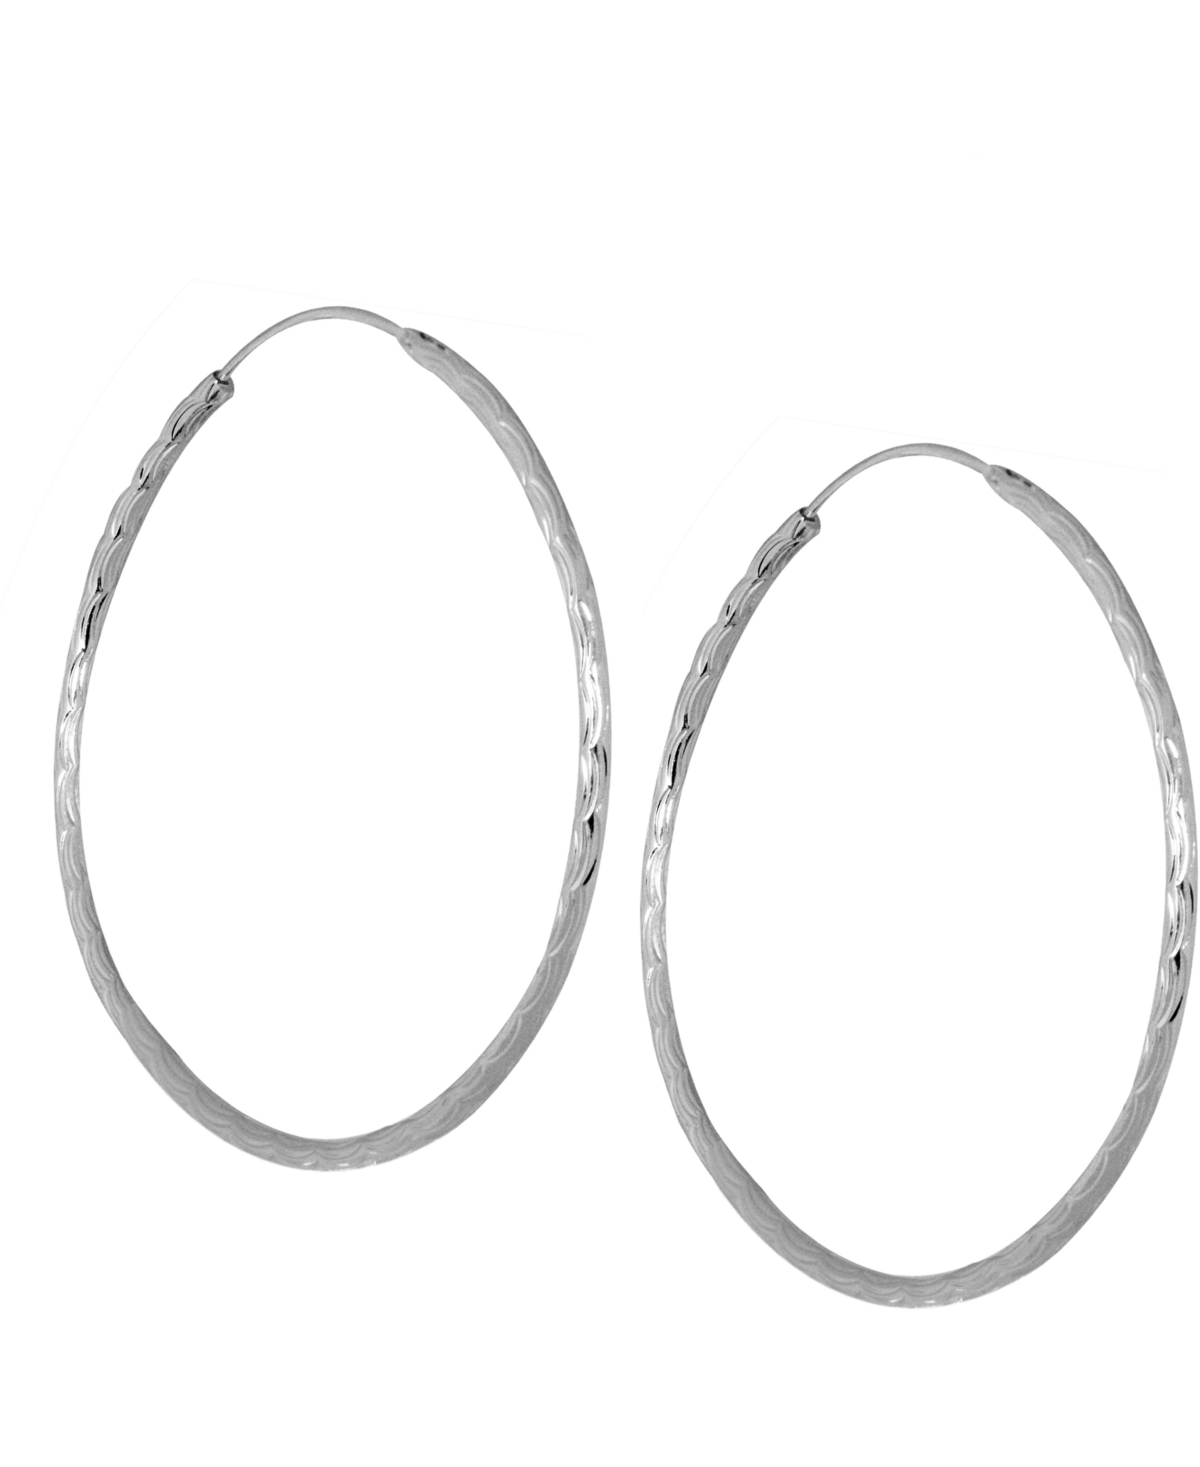 And Now This Medium Textured Endless Hoop Earrings, 2" in Silver or Gold Plate - Silver